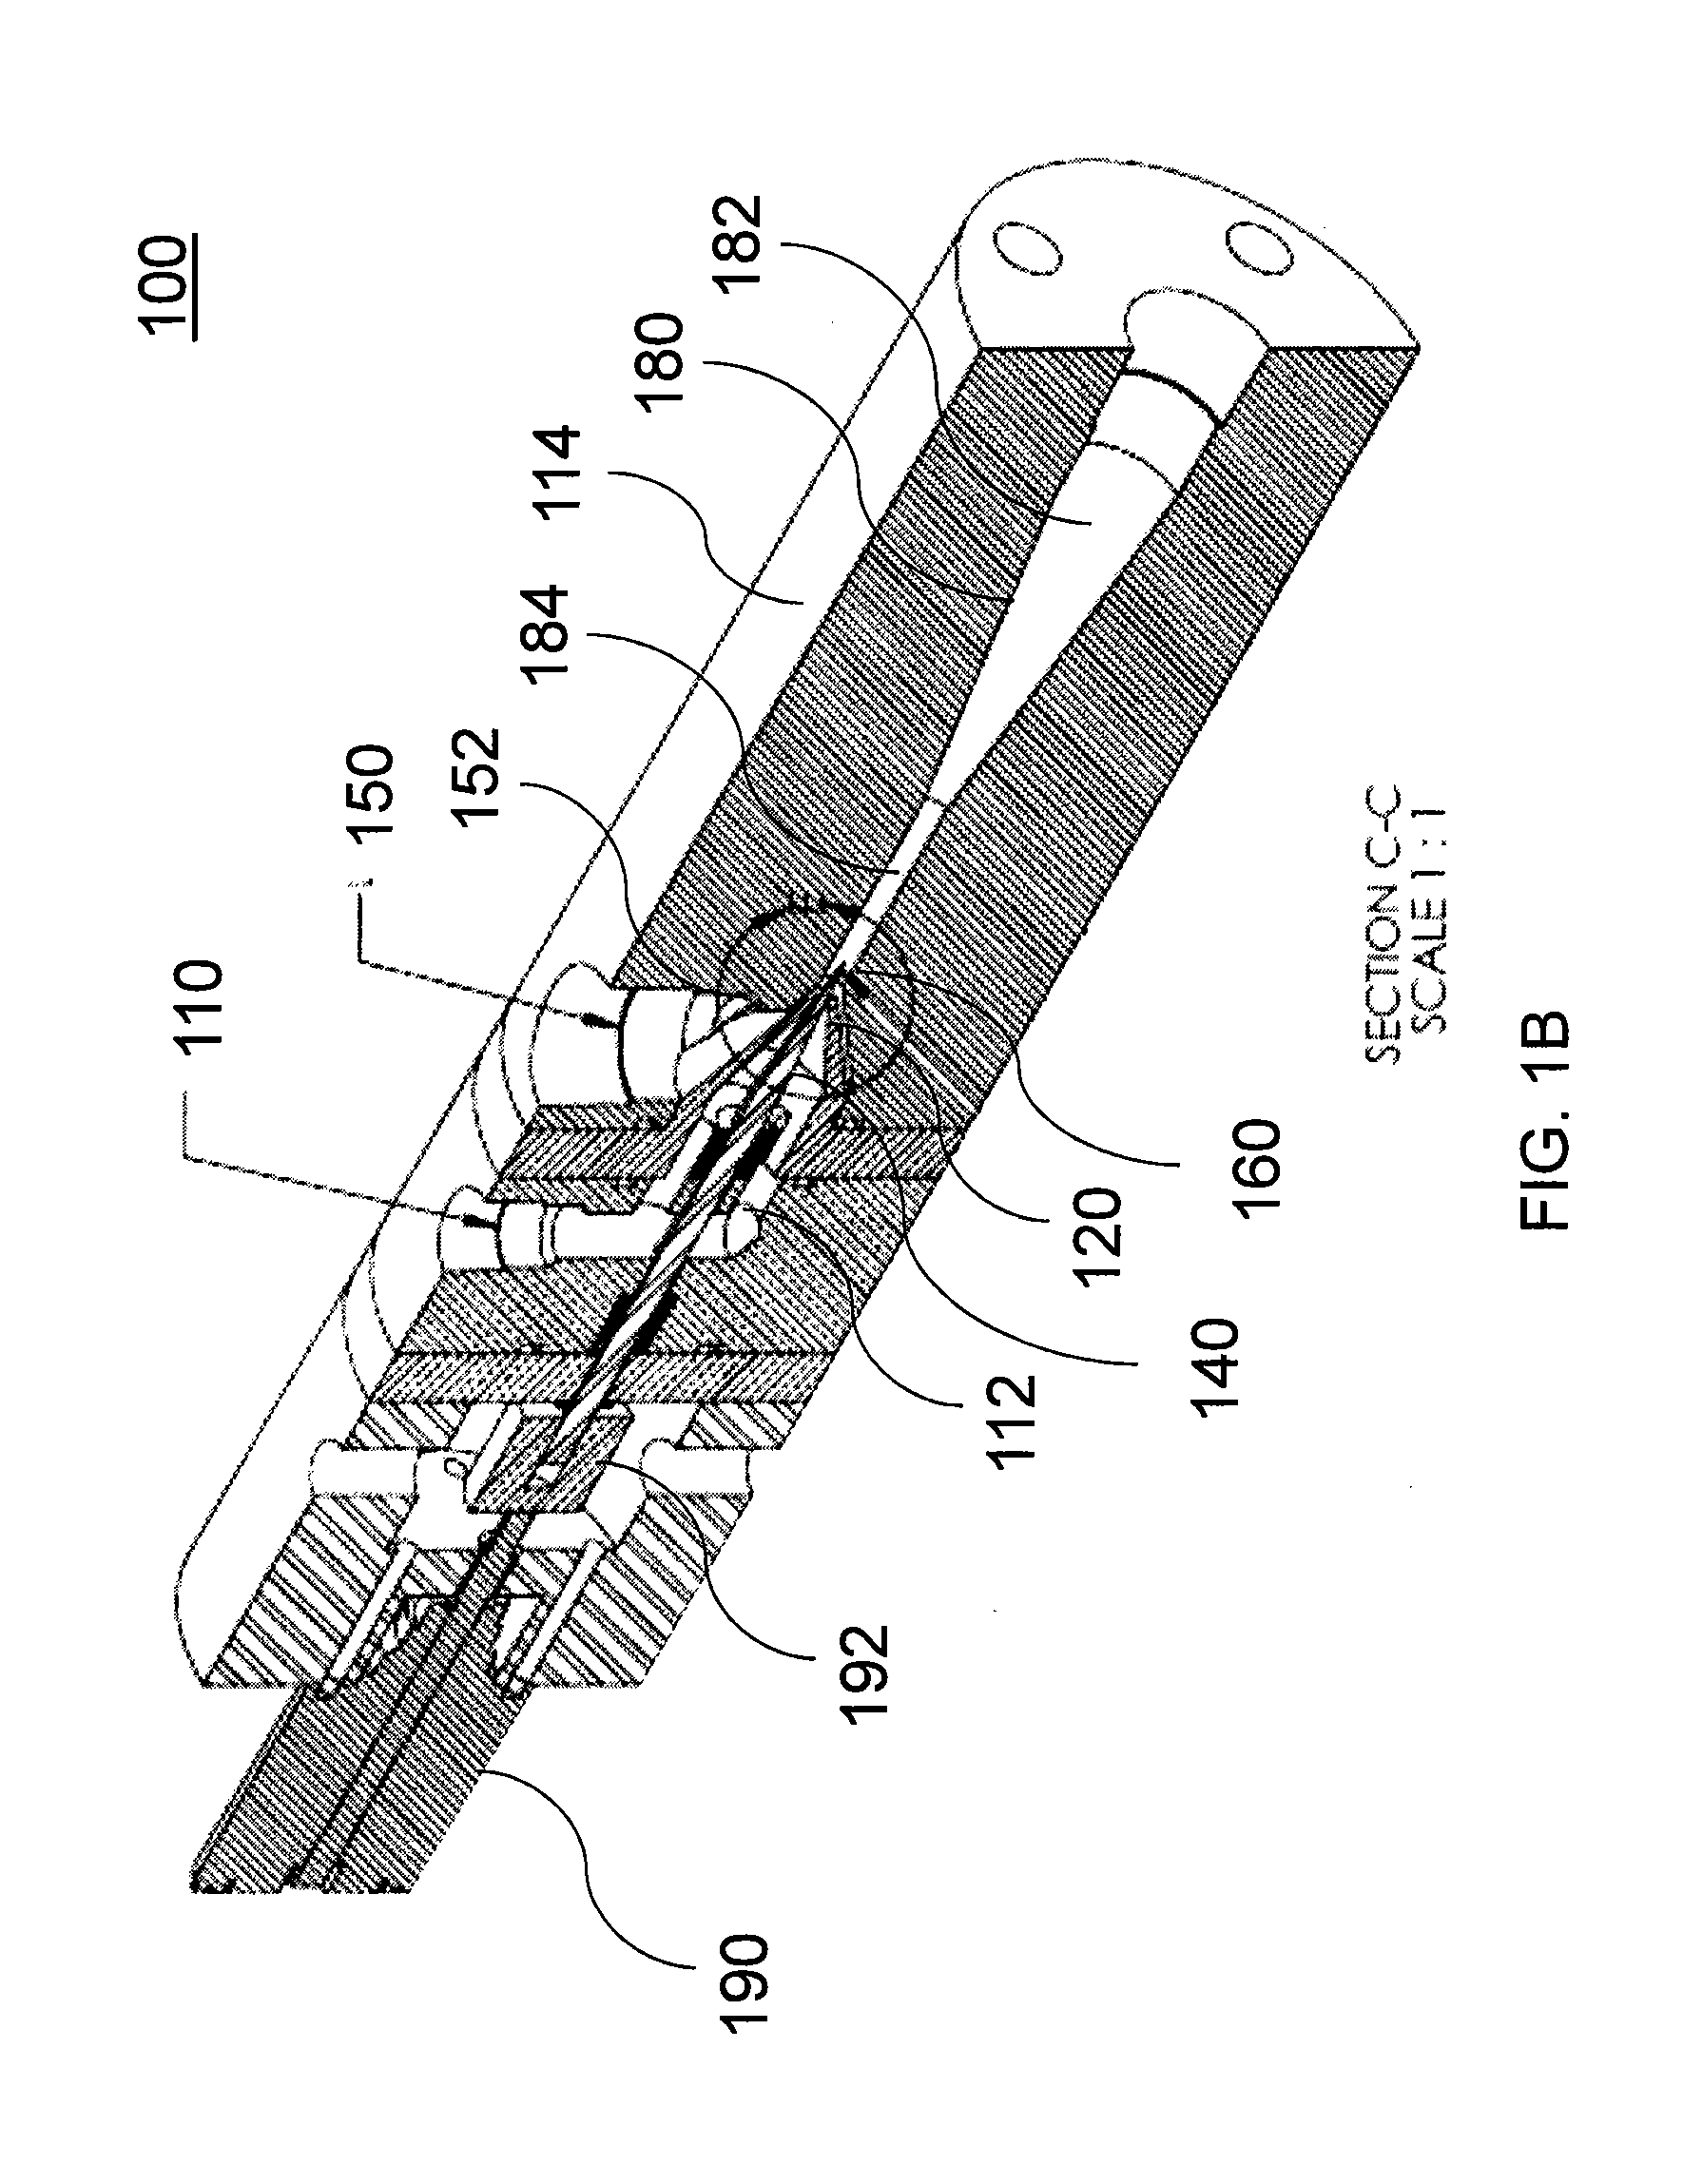 Devices, systems, and methods for variable flow rate fuel ejection